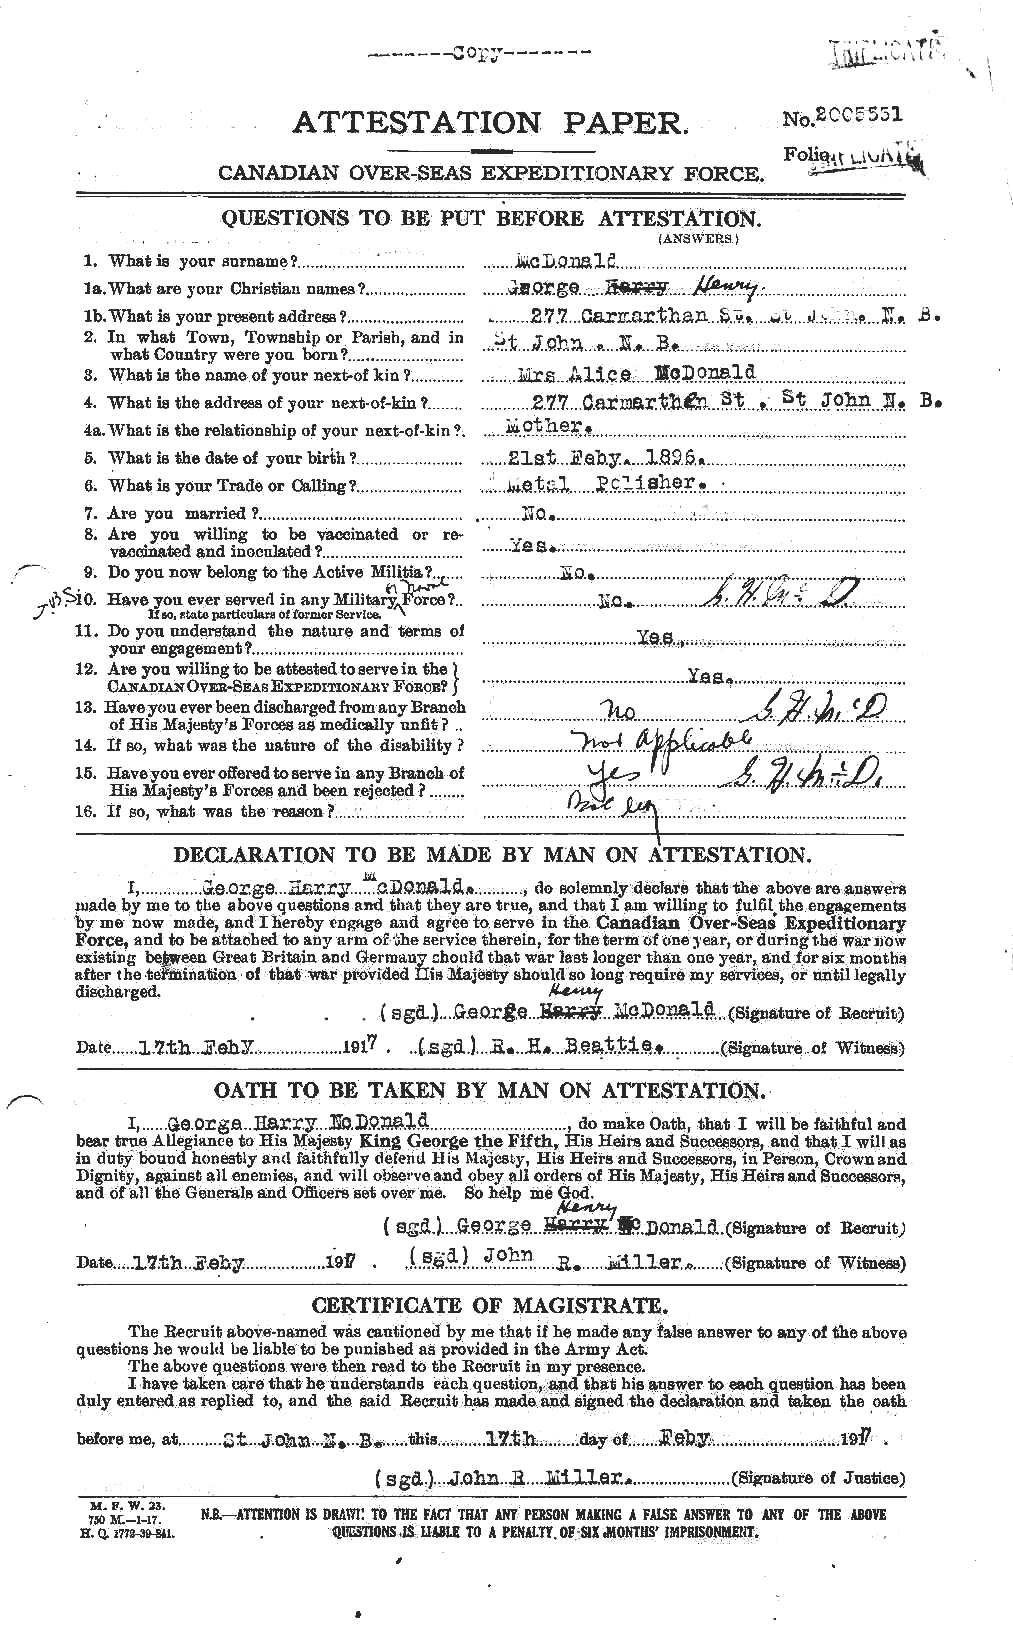 Personnel Records of the First World War - CEF 518841a